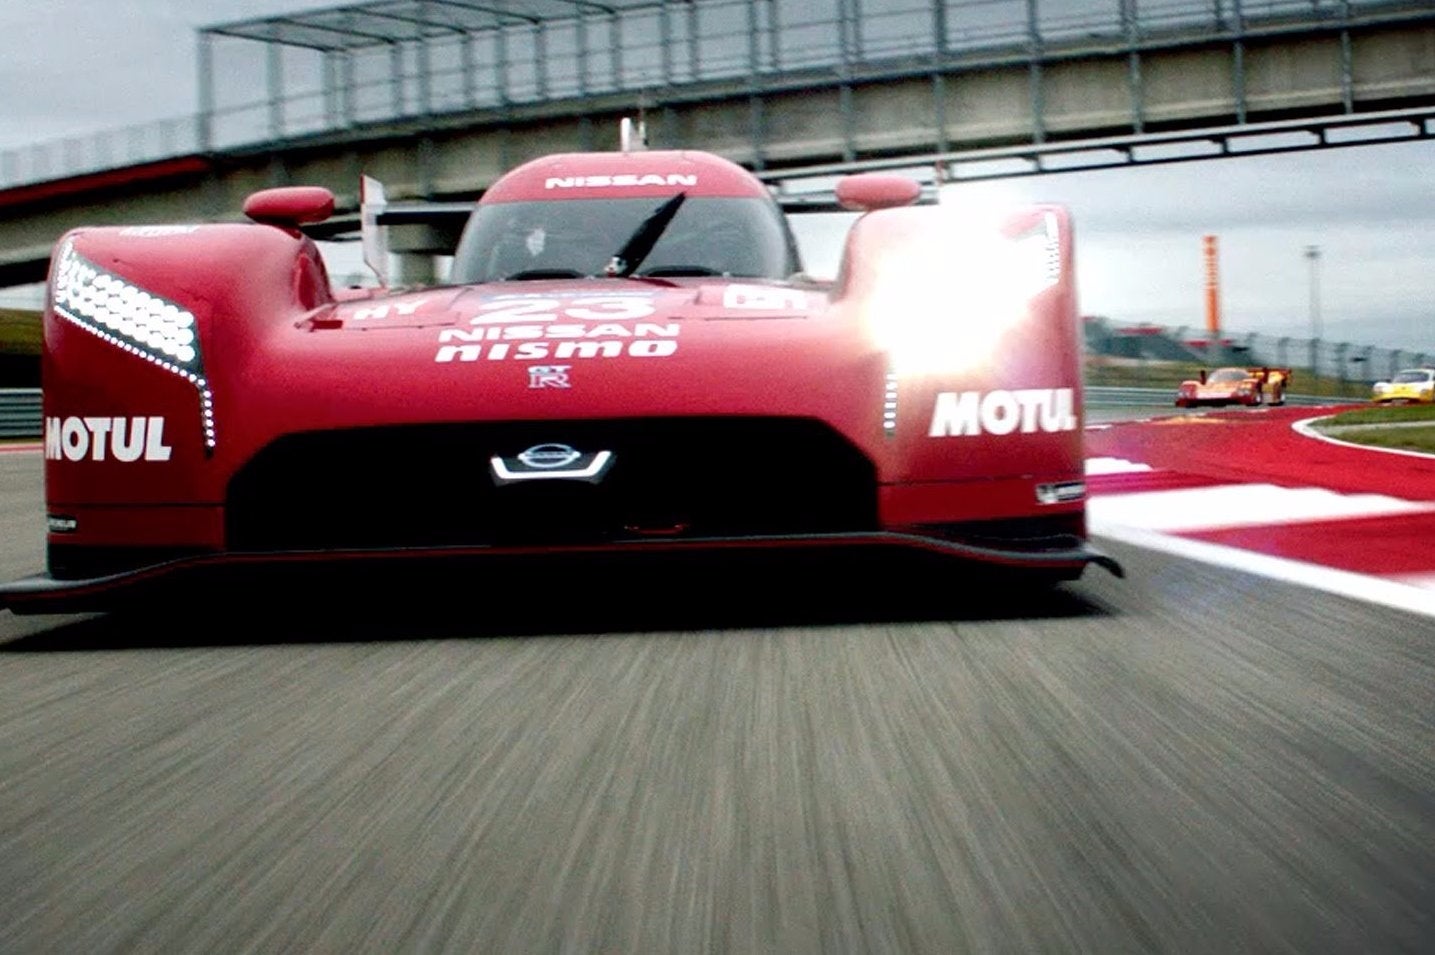 Image for Gran Turismo 6 is about to get this year's most exciting race car